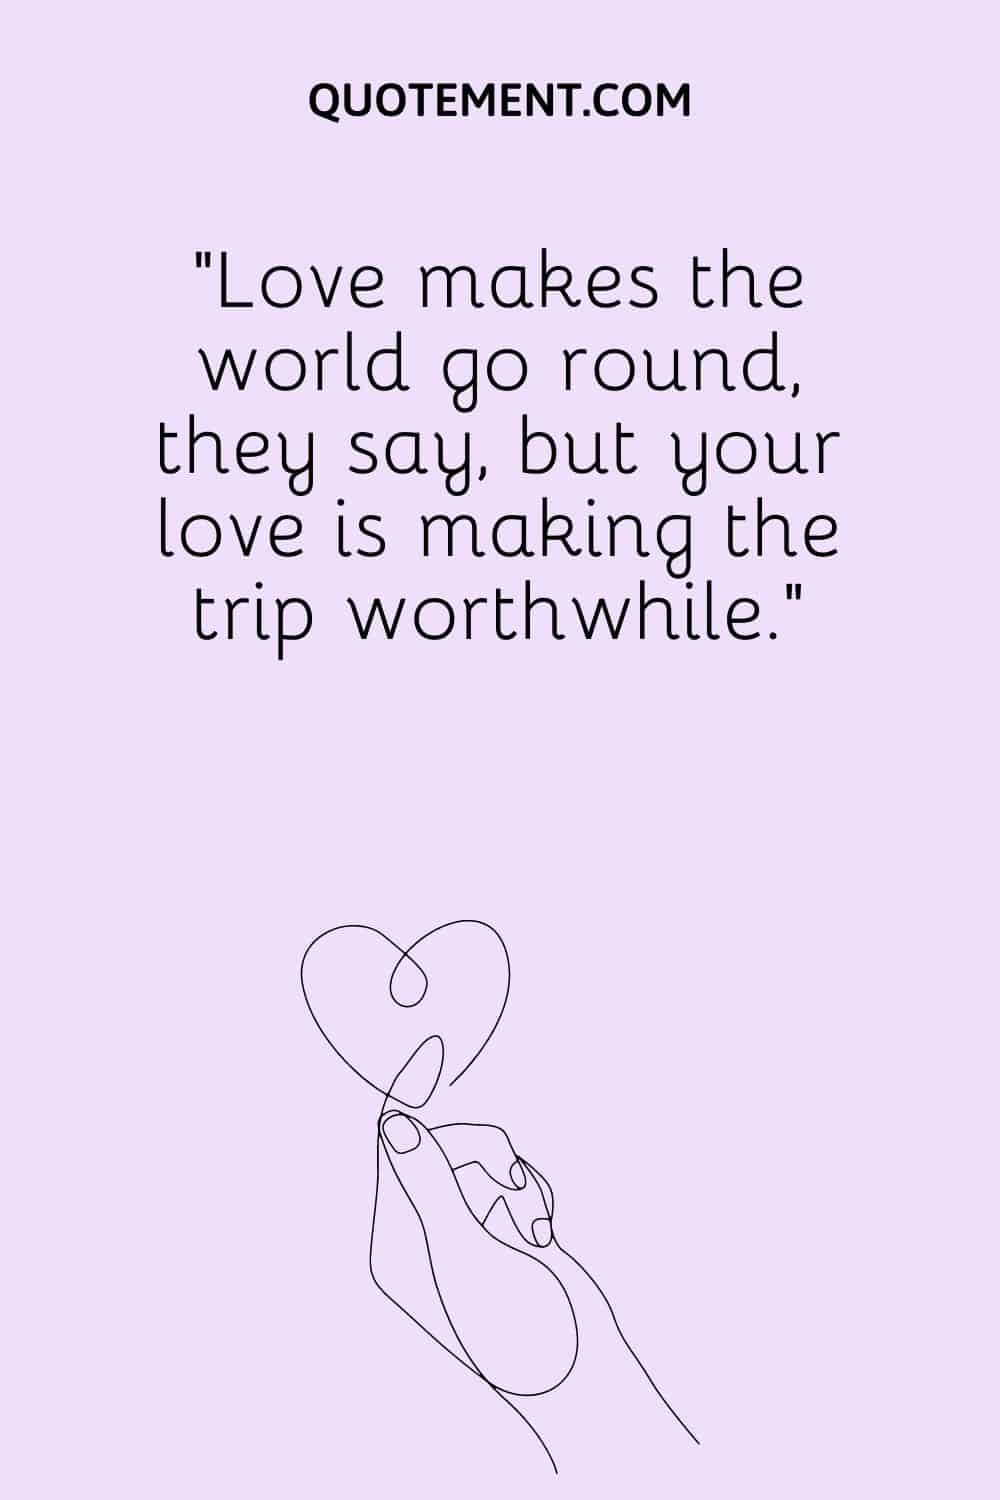 Love makes the world go round, they say, but your love is making the trip worthwhile.